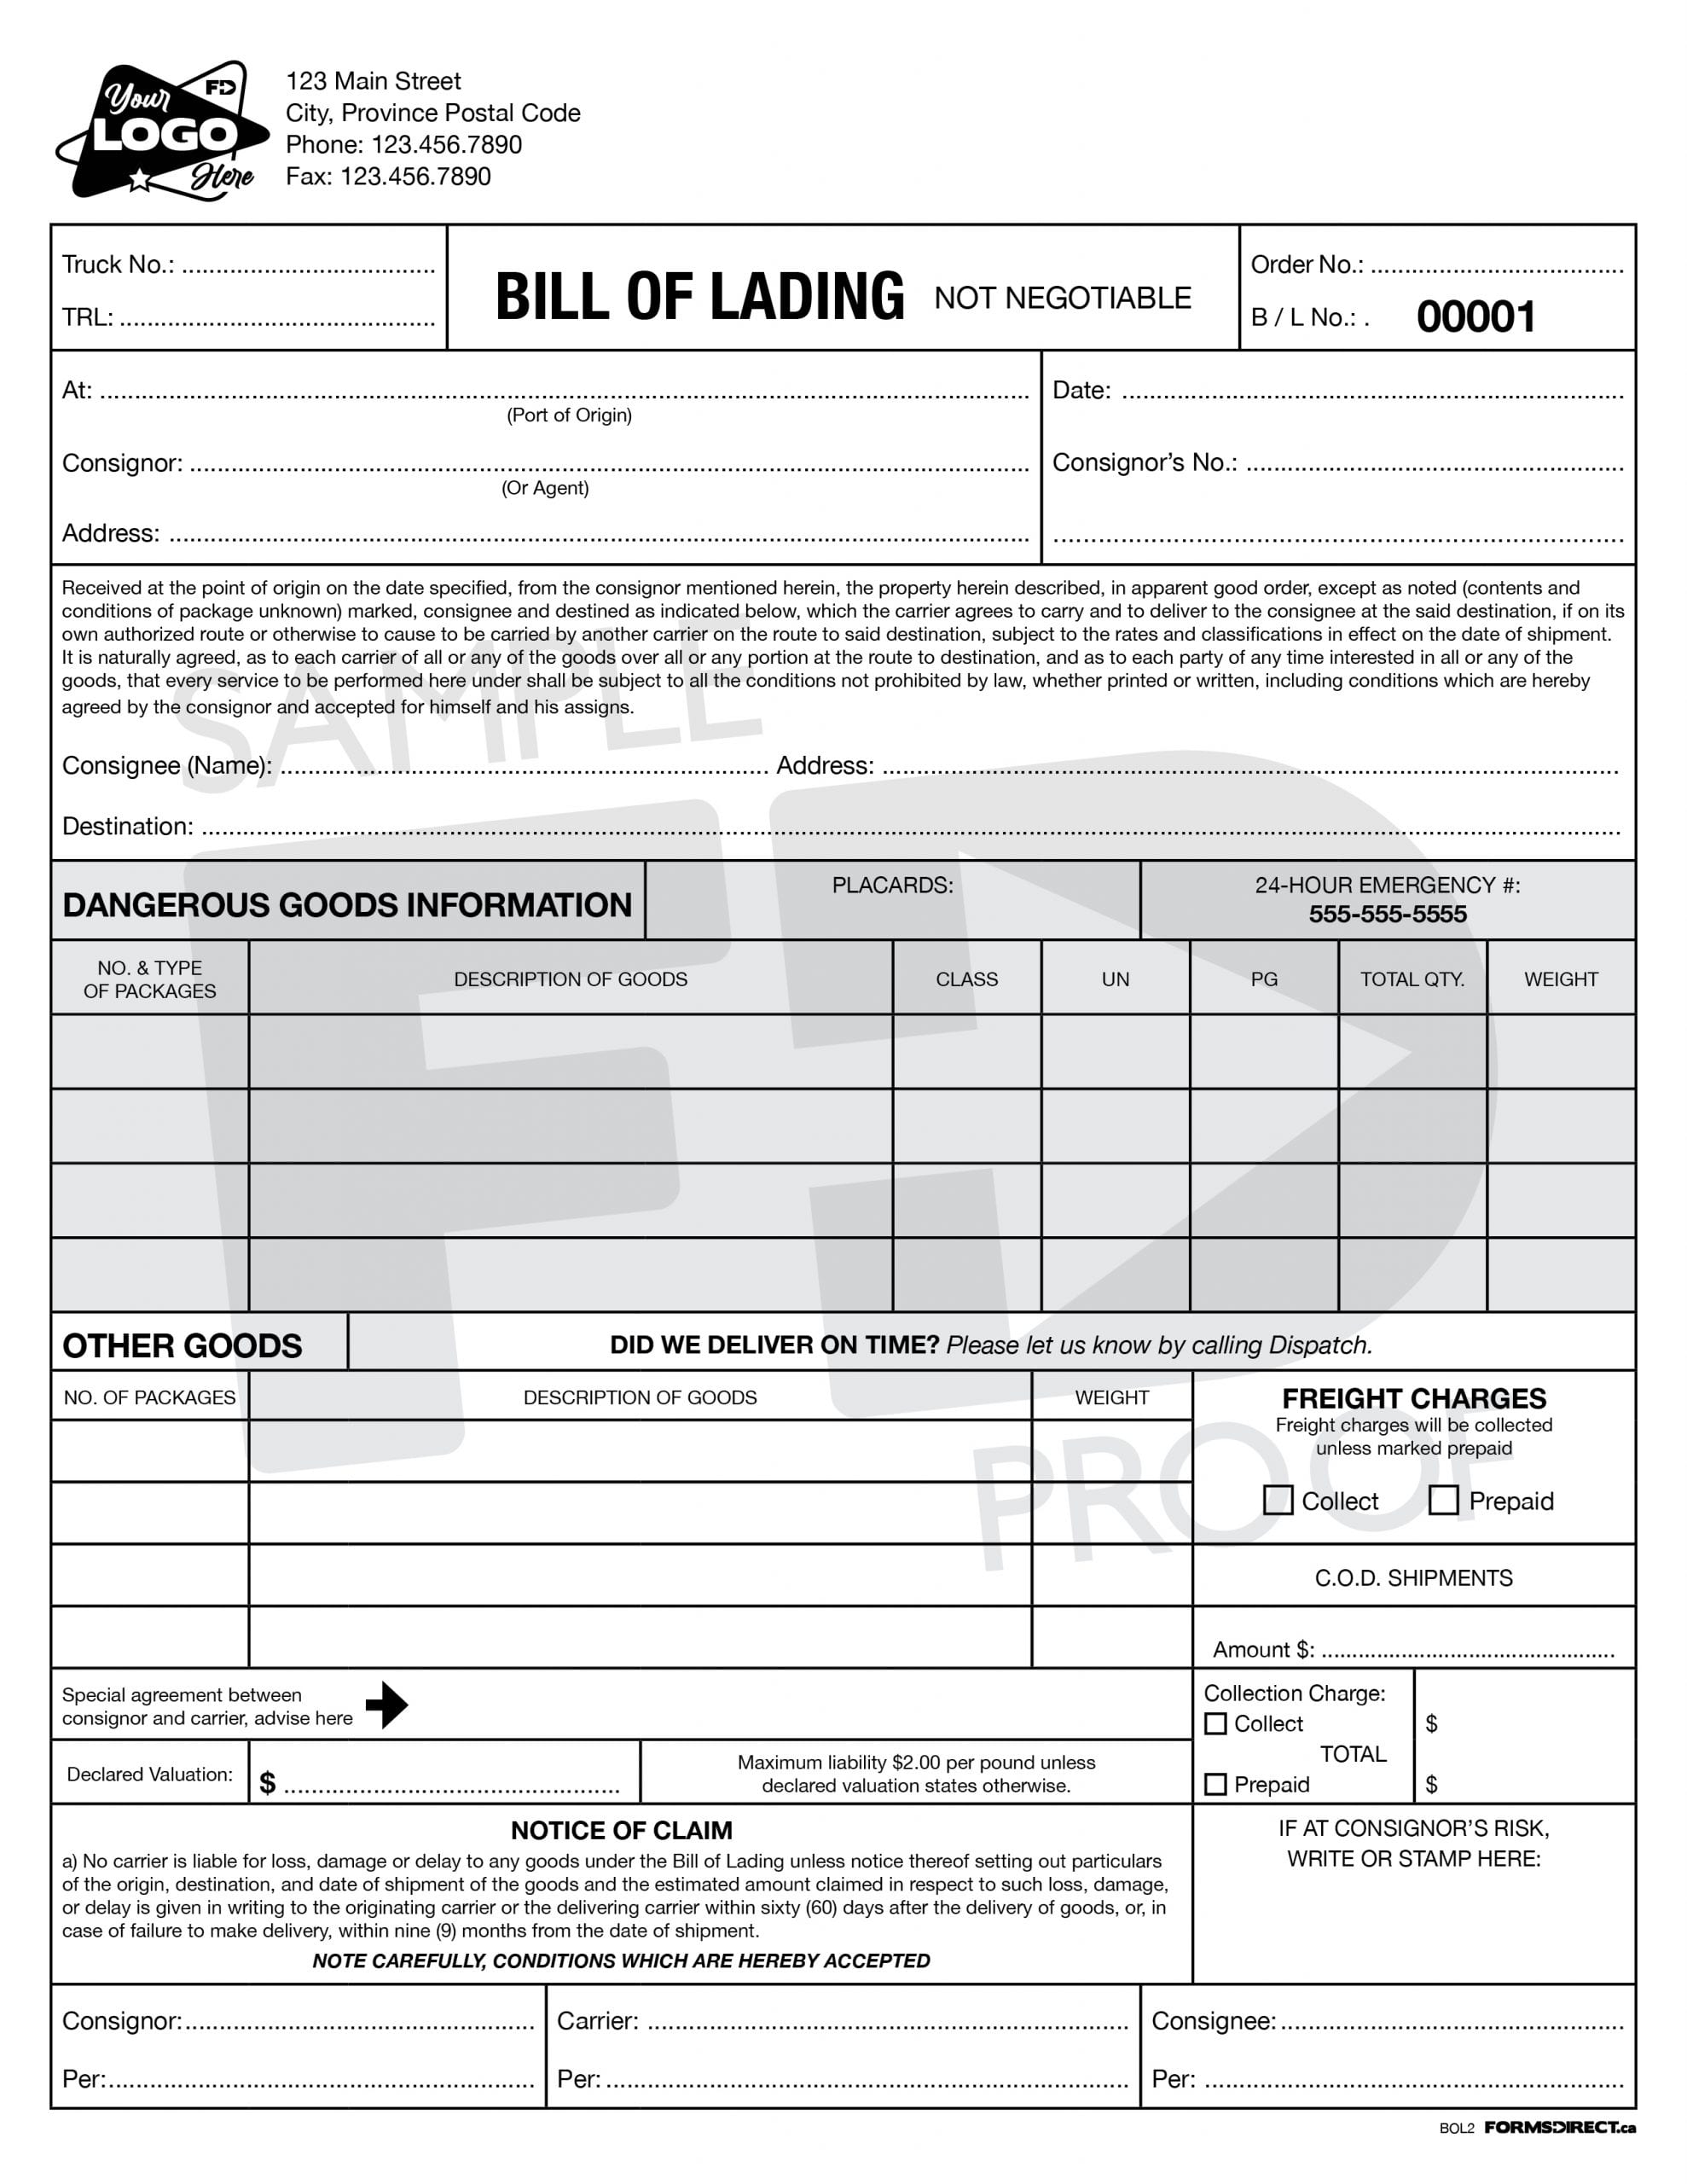 Bill of Lading BOL2 Custom NCR Form Template Forms Direct